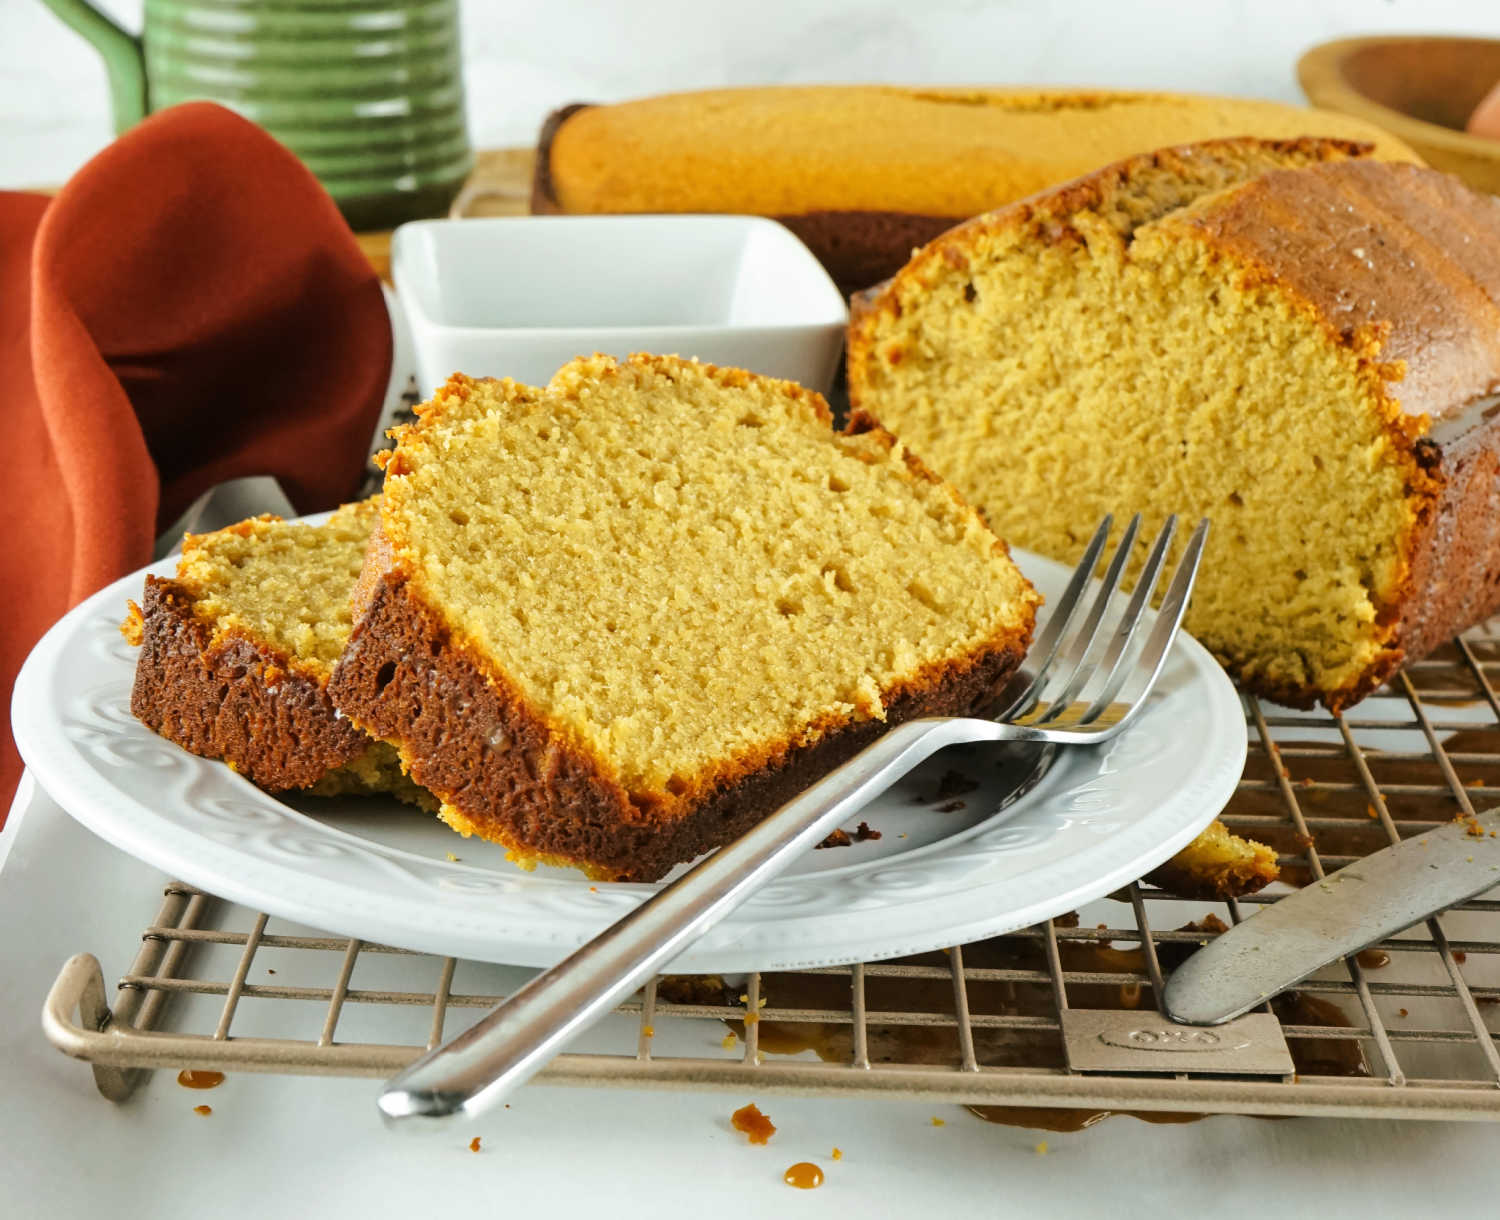 Slices of loaf shaped coffee flavored pound cake on plate with fork.